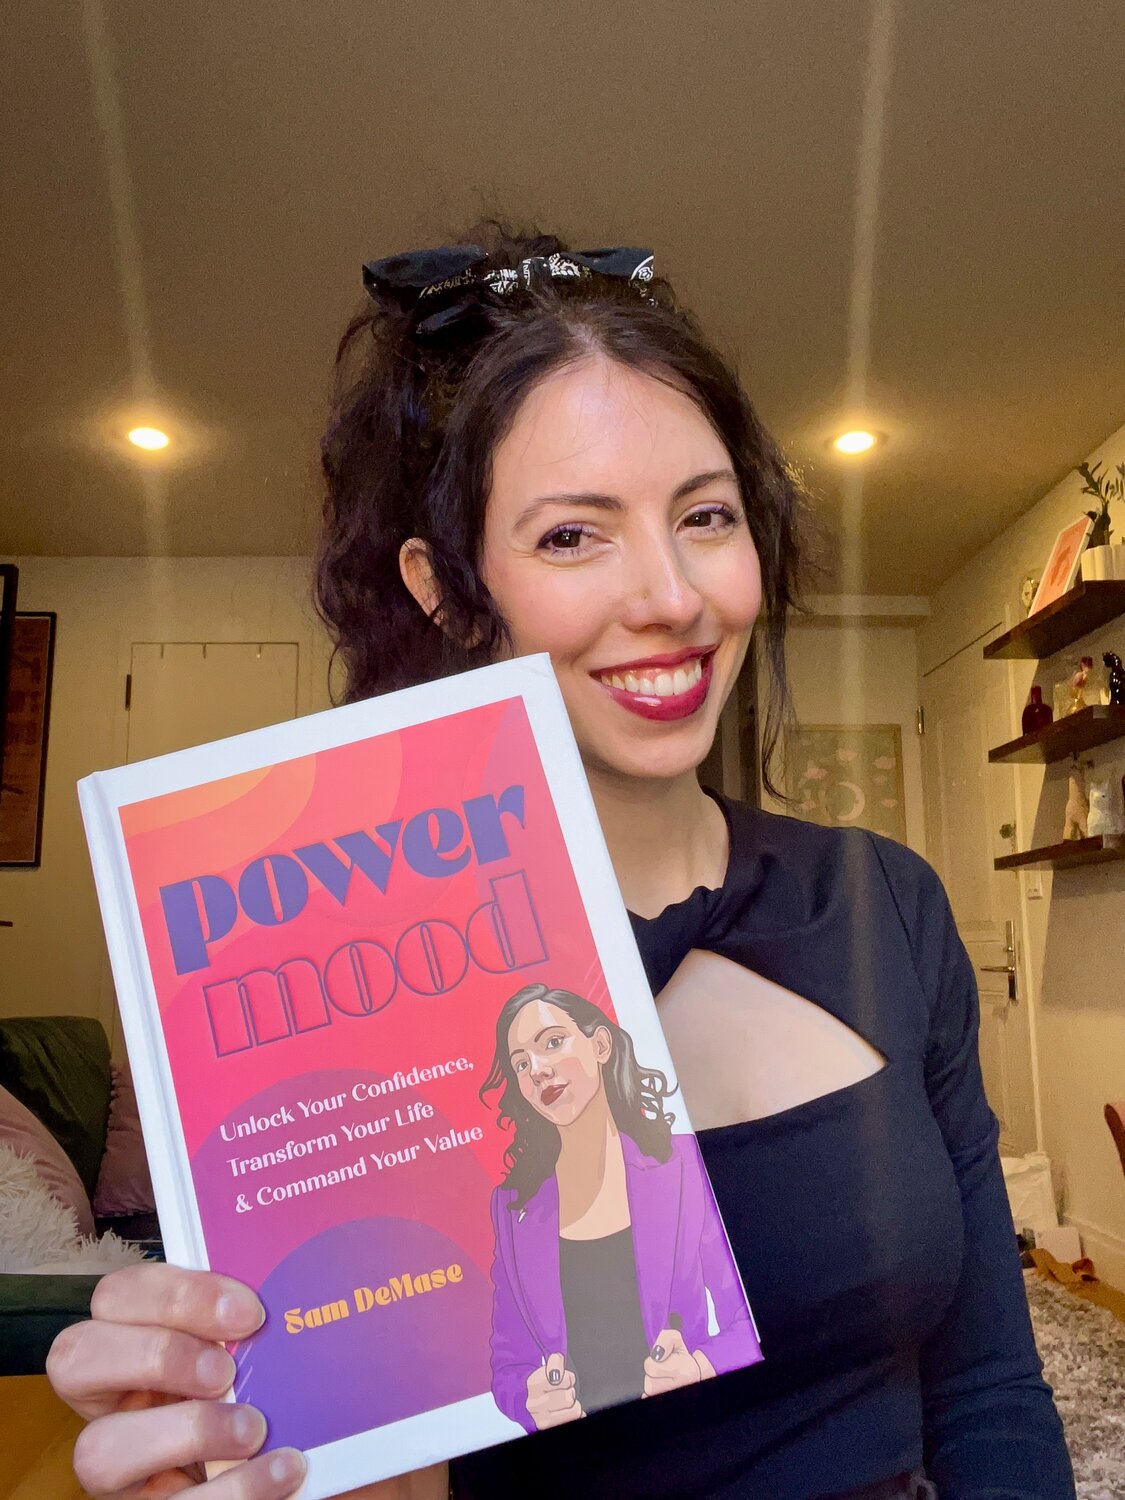 Sam DeMase, MacArthur class of 2006, has published a book called ‘Power Mood.’ Her book aims to inspire millennial and Gen Z women to stick up for themselves in the workplace.